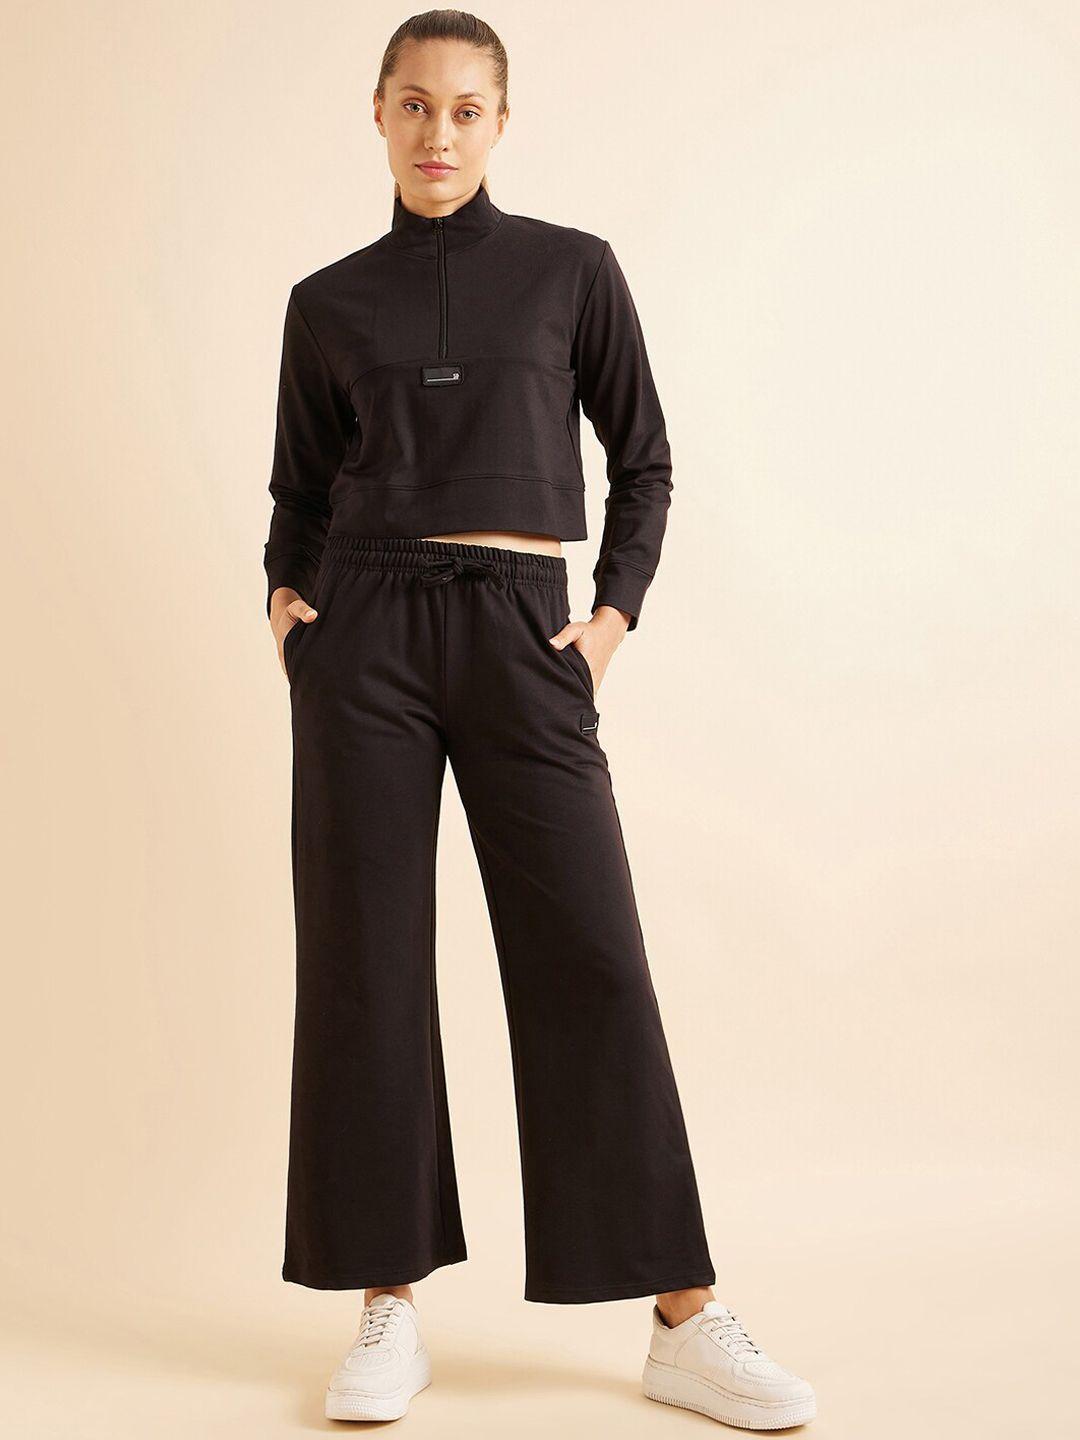 sweet dreams pure cotton high neck top & trousers